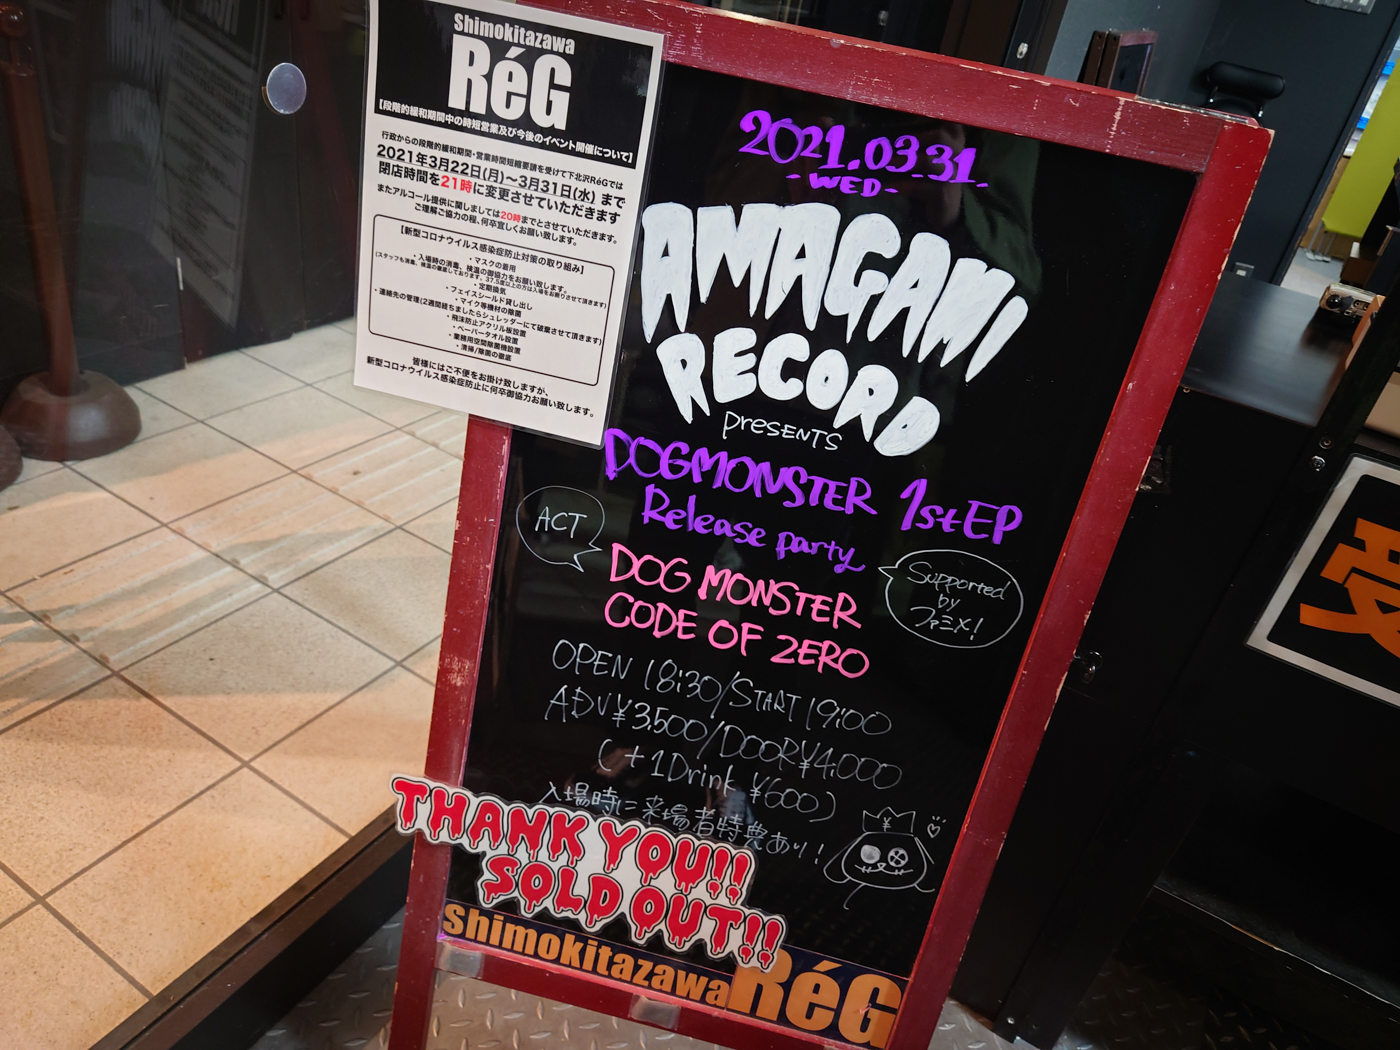 AMAGAMI RECORD presents 『DOG MONSTER 1st EP Release party』supported by ファミメ！＠下北沢ReG